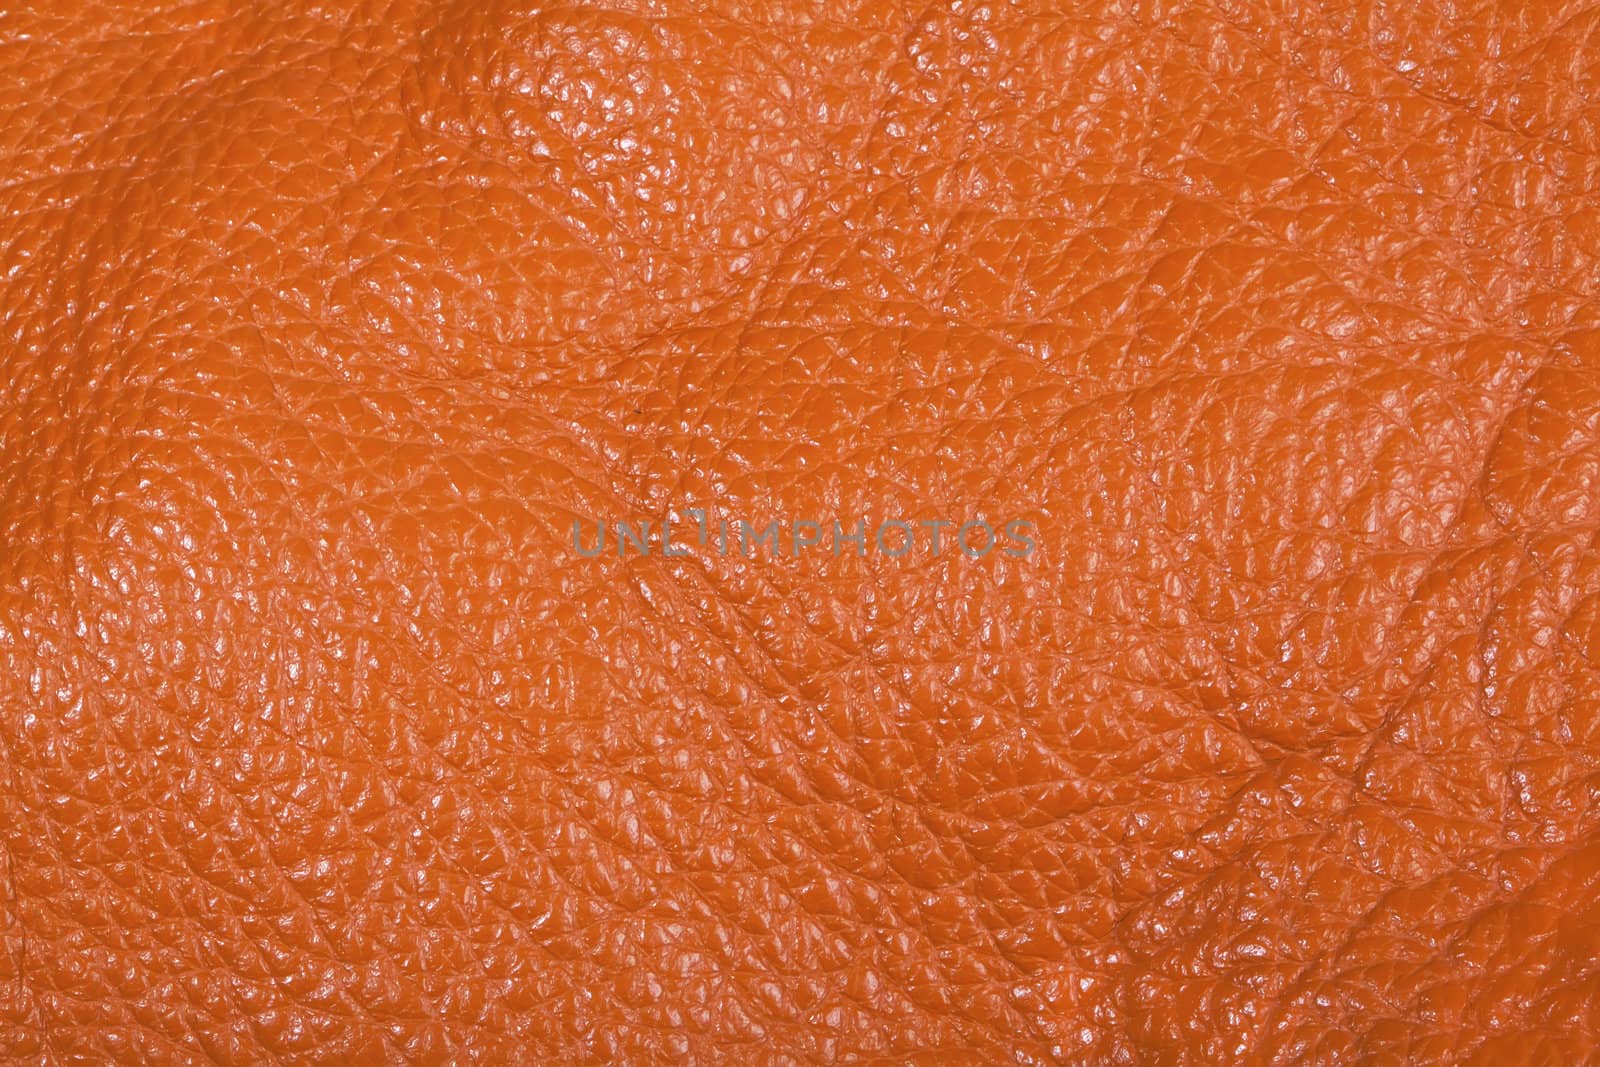 Orange leather texture background by RawGroup